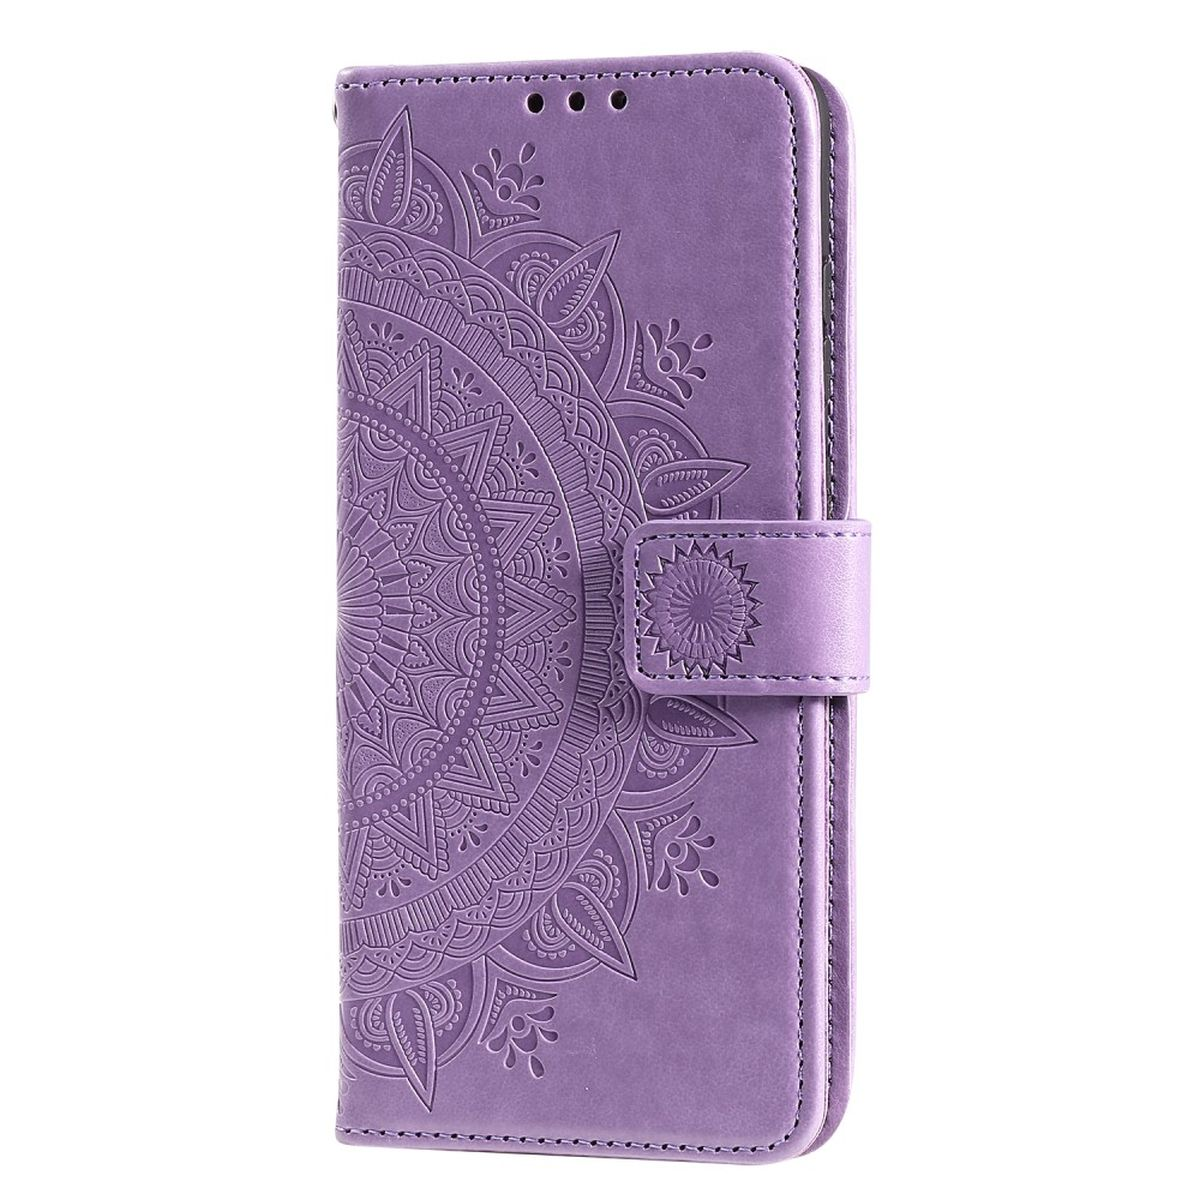 A13 COVERKINGZ Bookcover, mit Galaxy Klapphülle Mandala Lila 4G, Samsung, Muster,